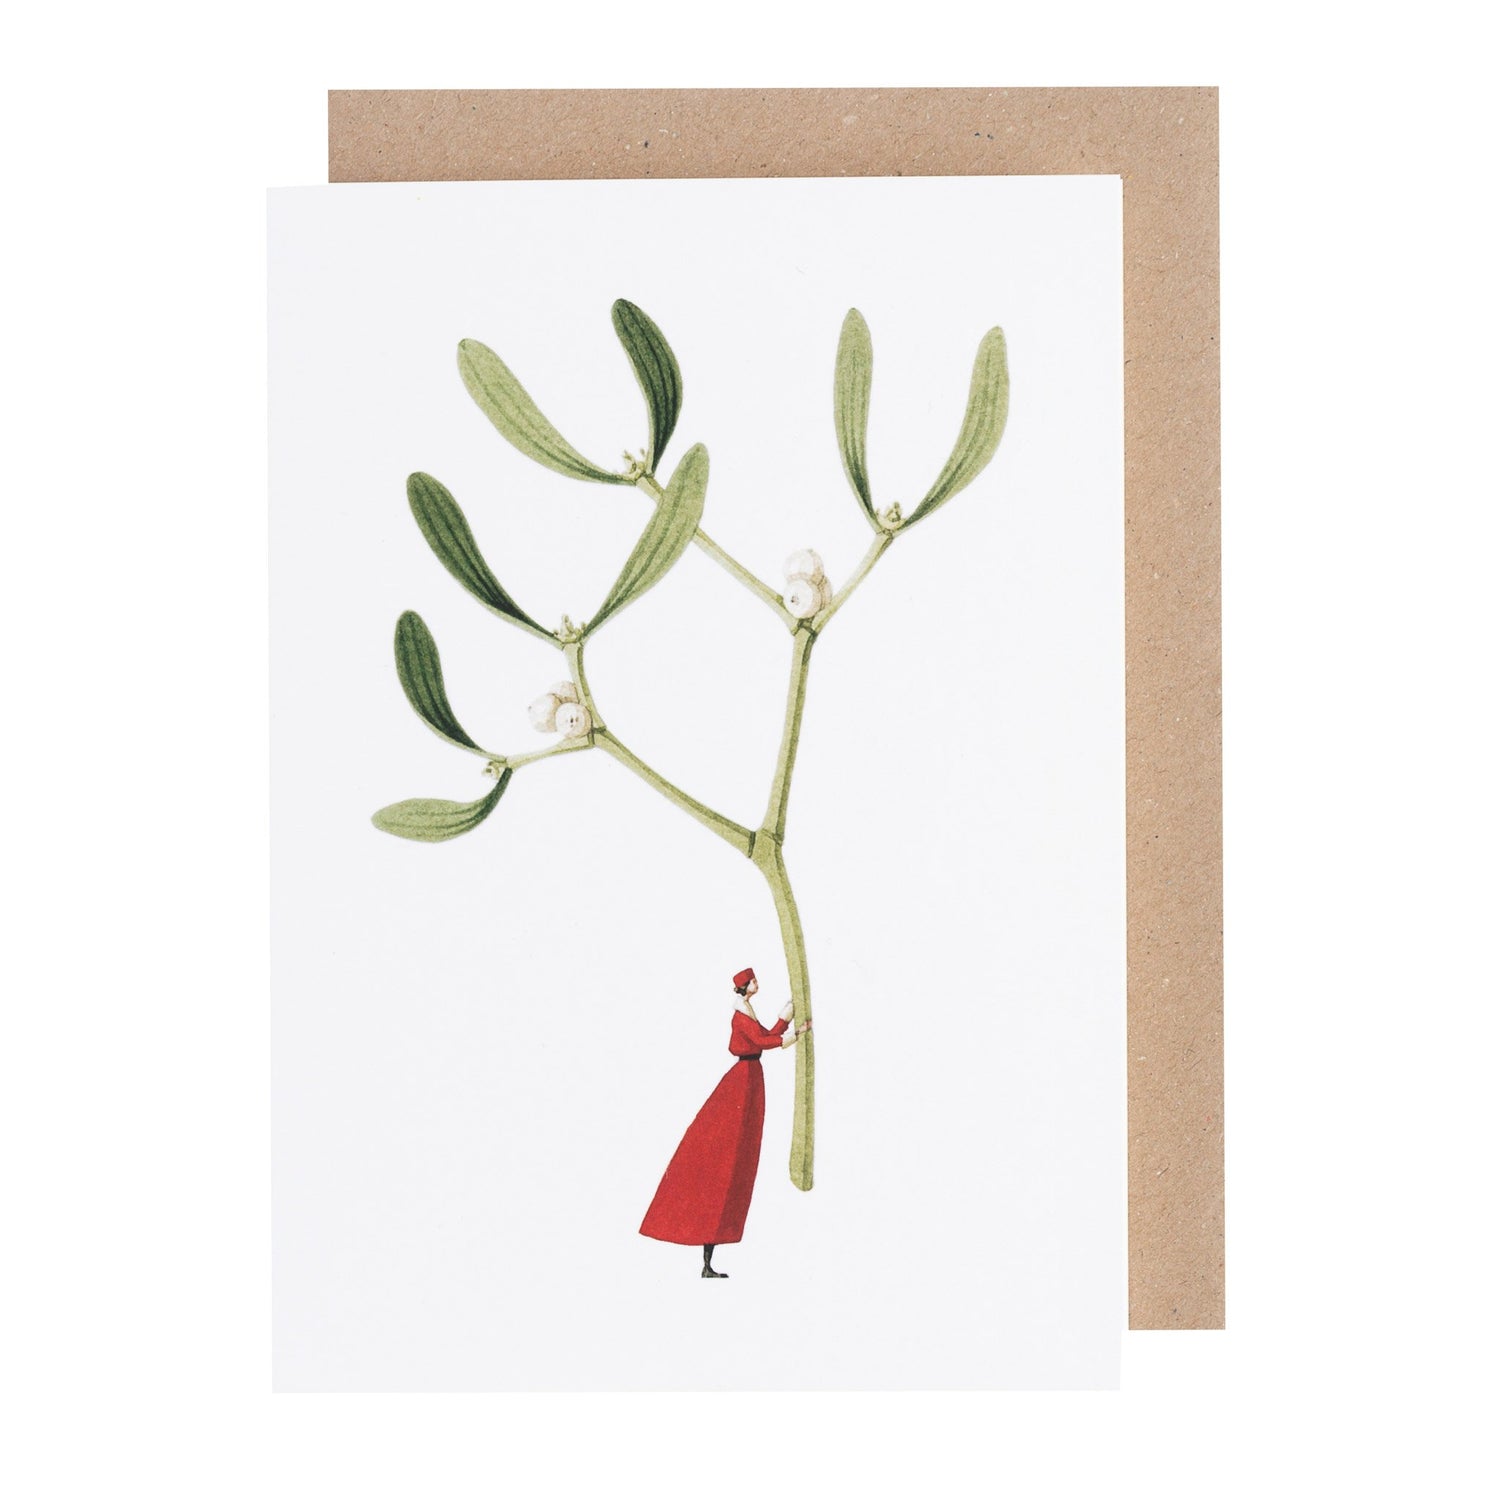 environmentally sustainable paper, compostable packaging, recycled paper, made in england, illustration, mistletoe, christmas